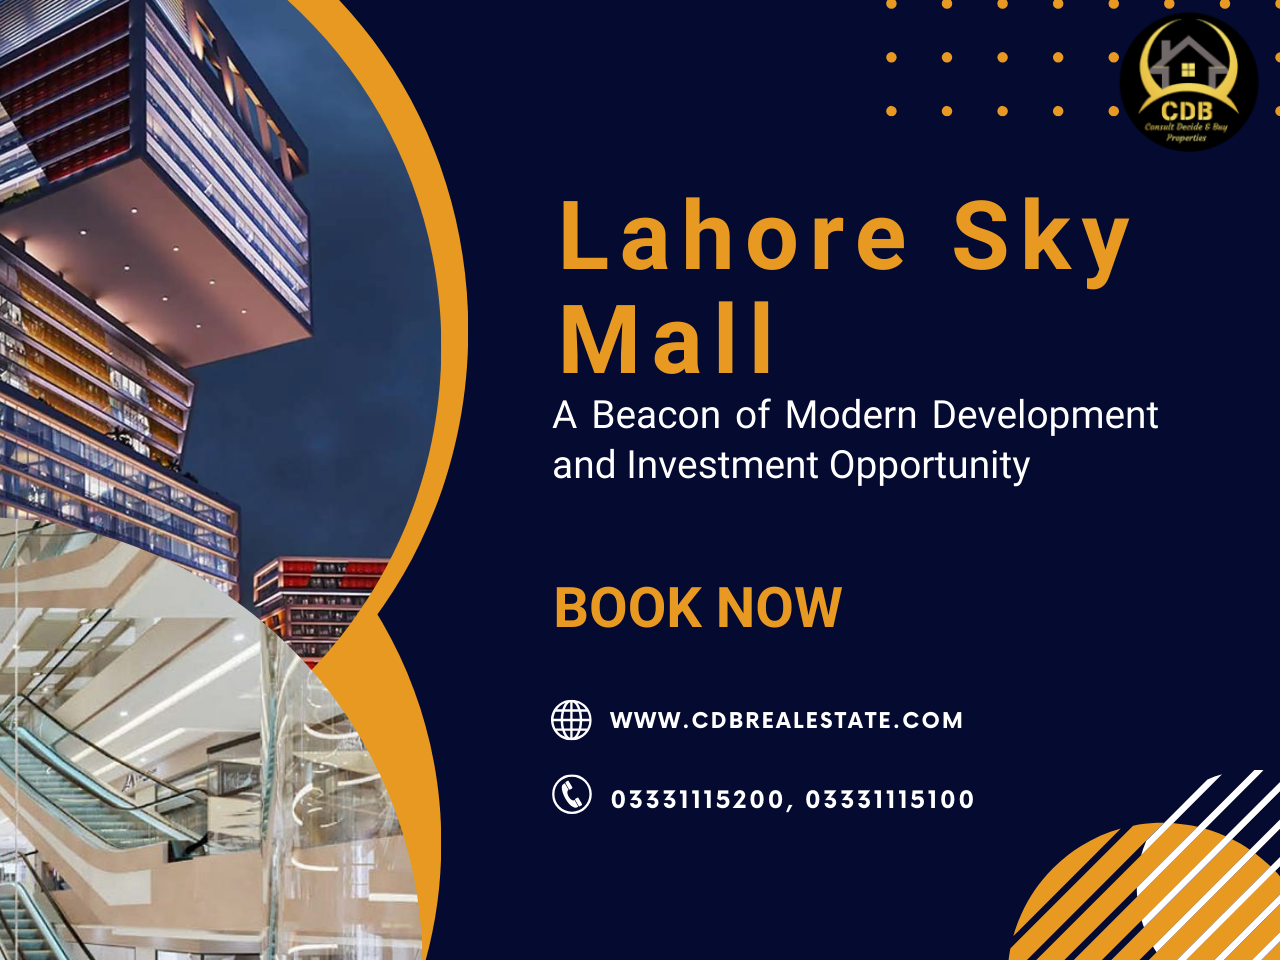 Lahore Sky Mall